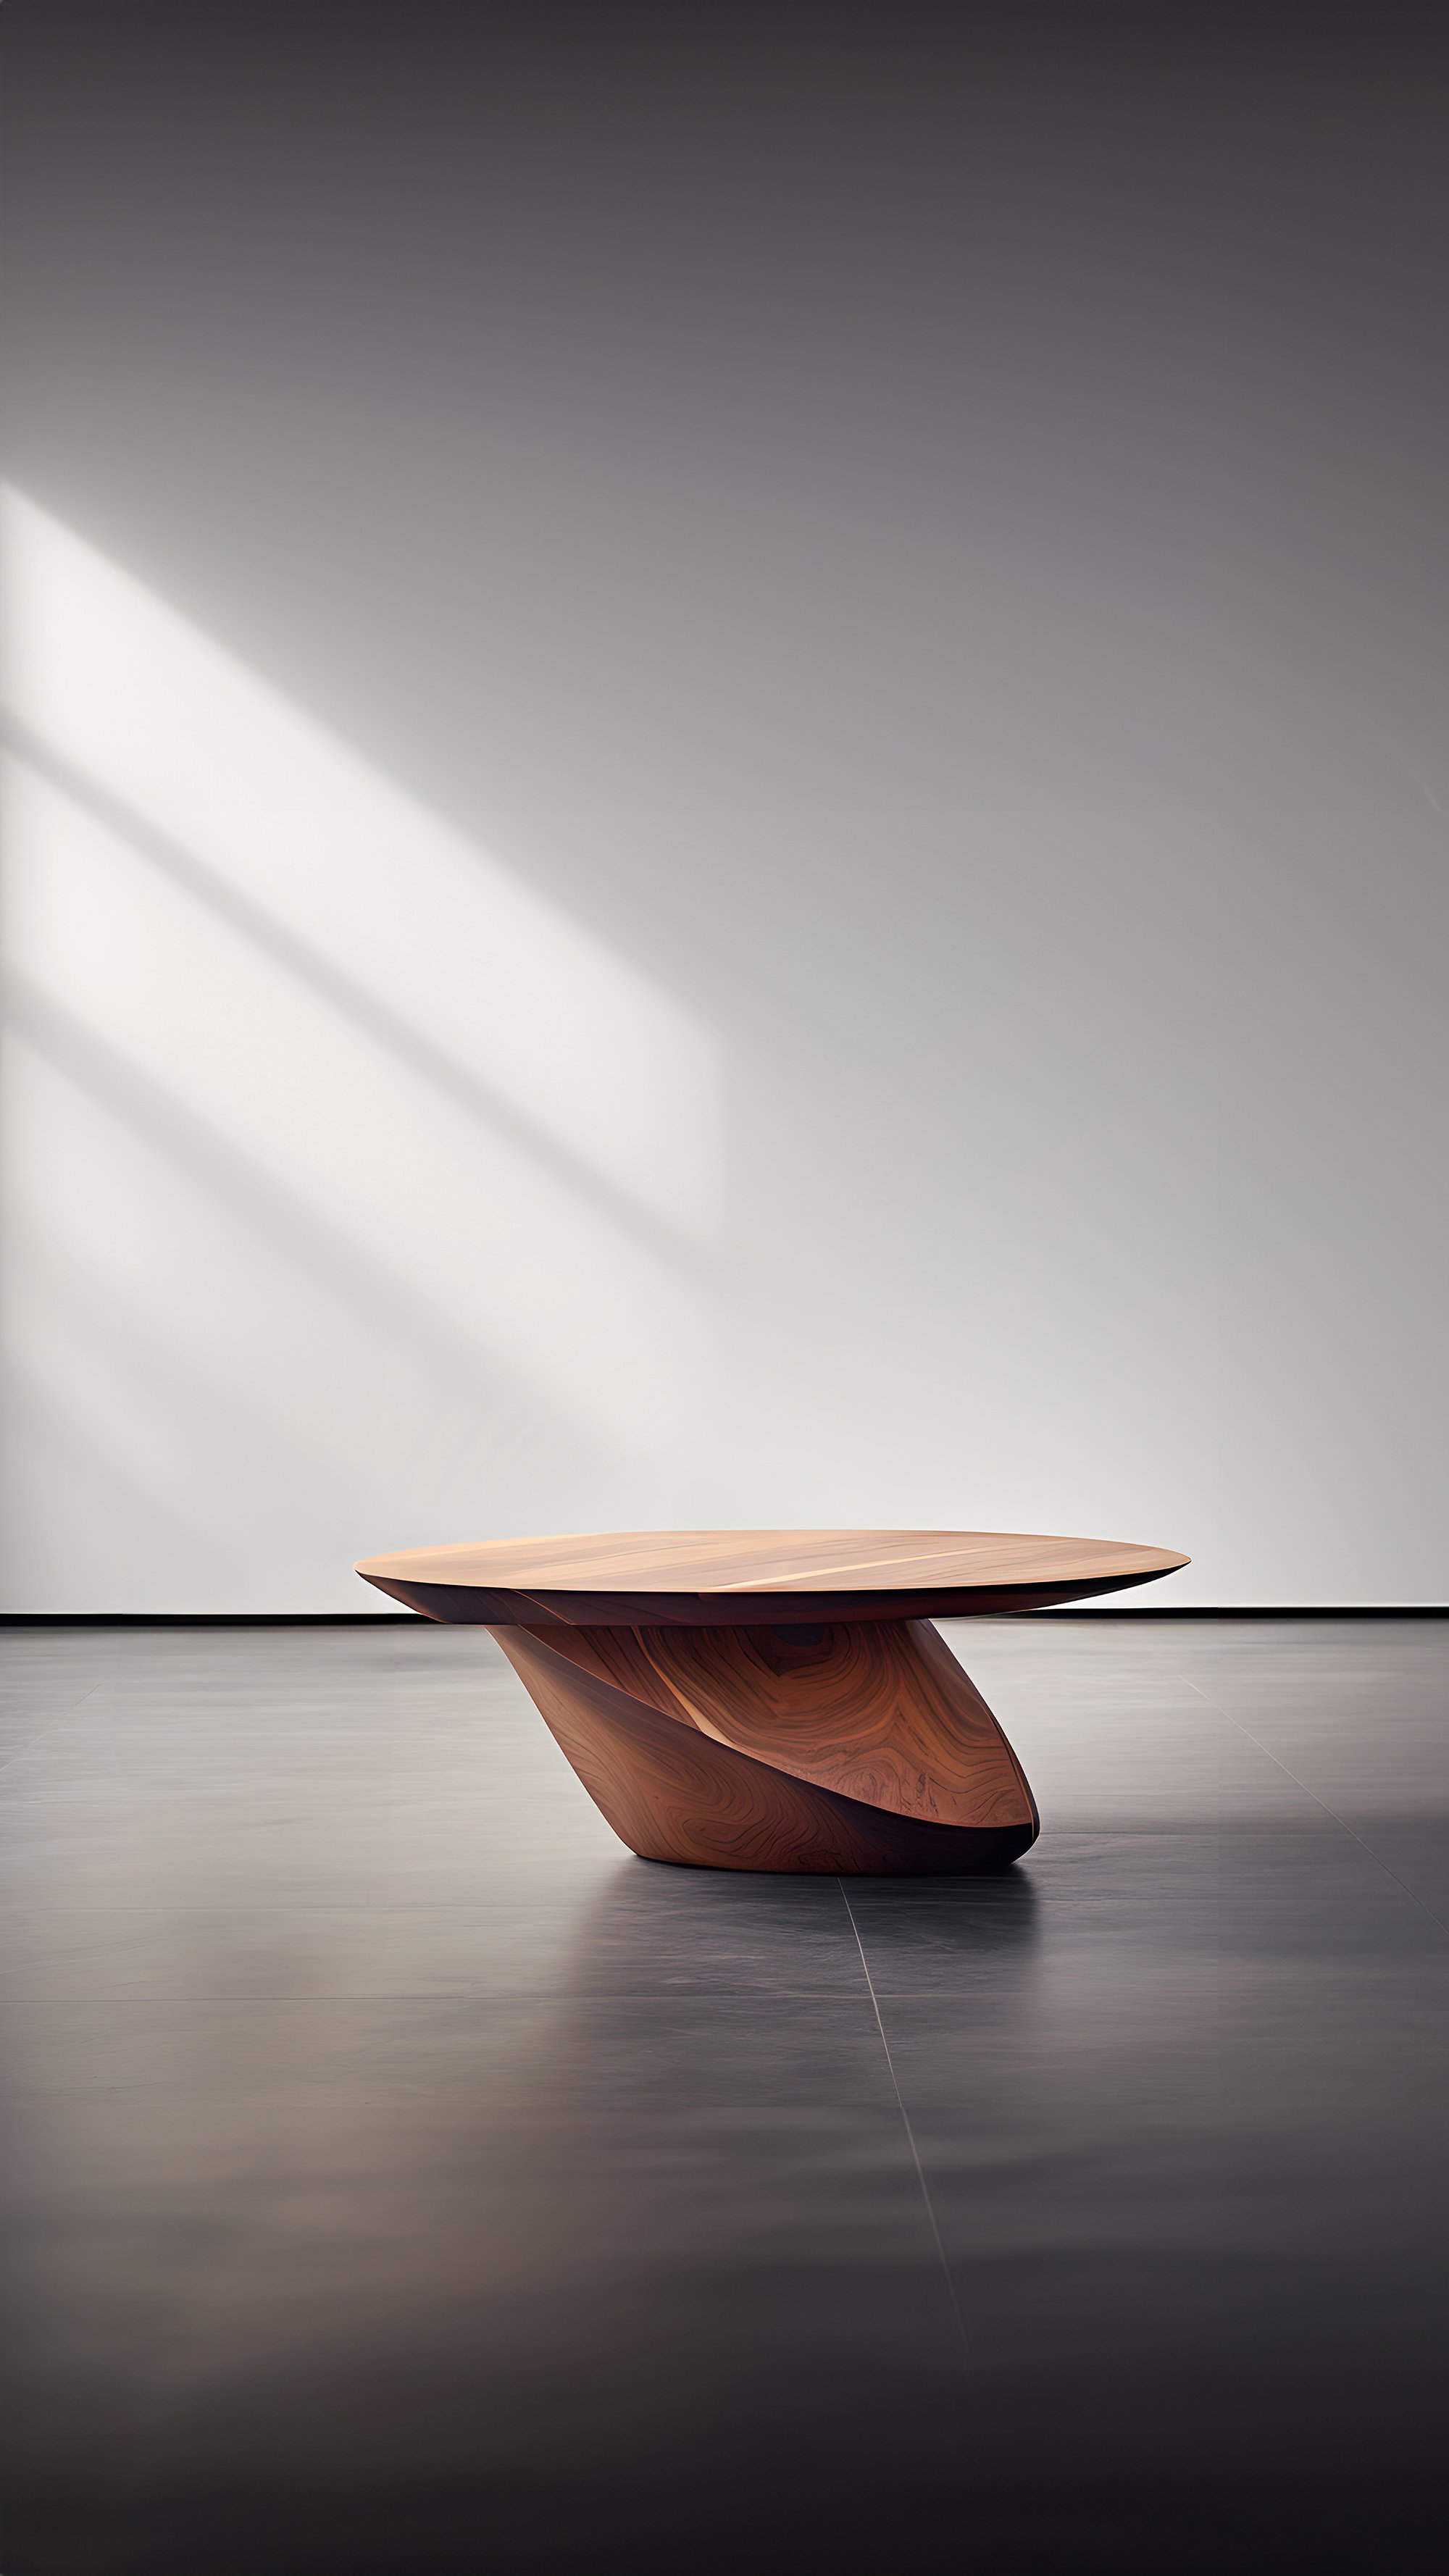 Sculptural Coffee Table Made of Solid Wood, Center Table Solace S40 by Joel Escalona — 8.jpg